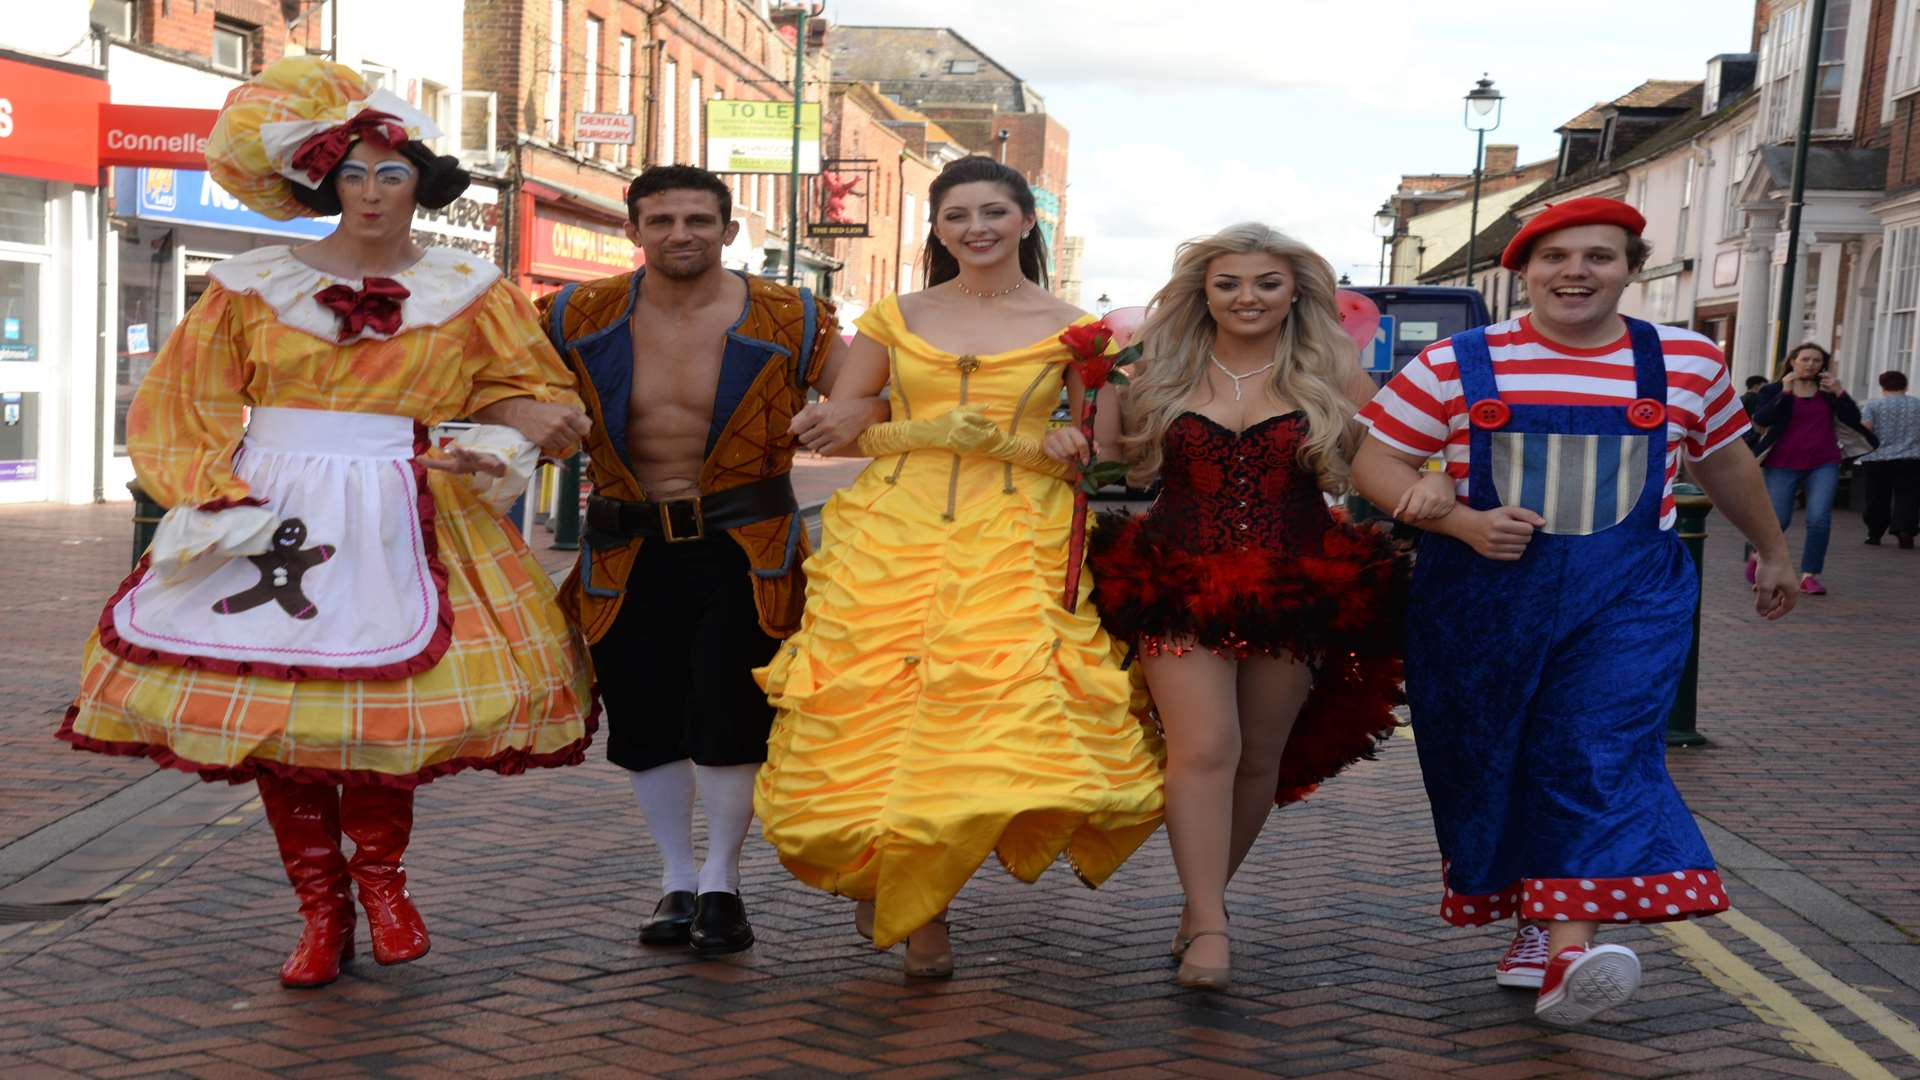 Harry Moore as Dame Dotty Dumpling, Alex Reid as Gaston, Katie Burke as Belle, Lauren Wootton as Fairy Rose and Joe Lucas as Loopy Louis who will be appearing in Beauty and the Beast at the Swallows Leisure Centre in December